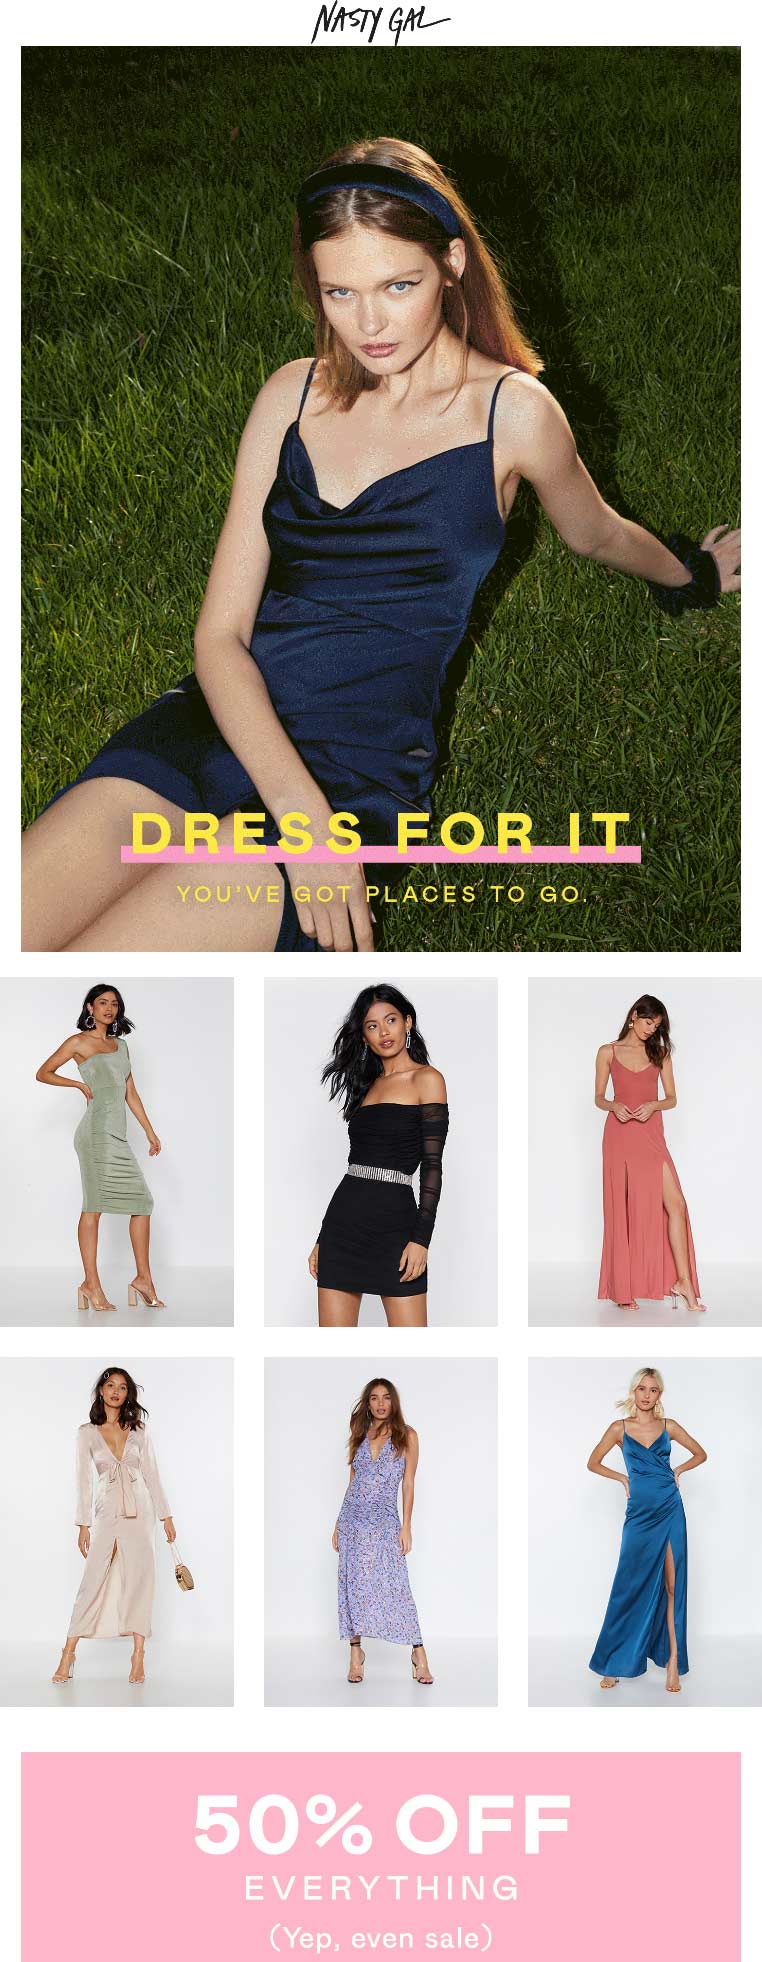 Nasty Gal coupons & promo code for [October 2022]